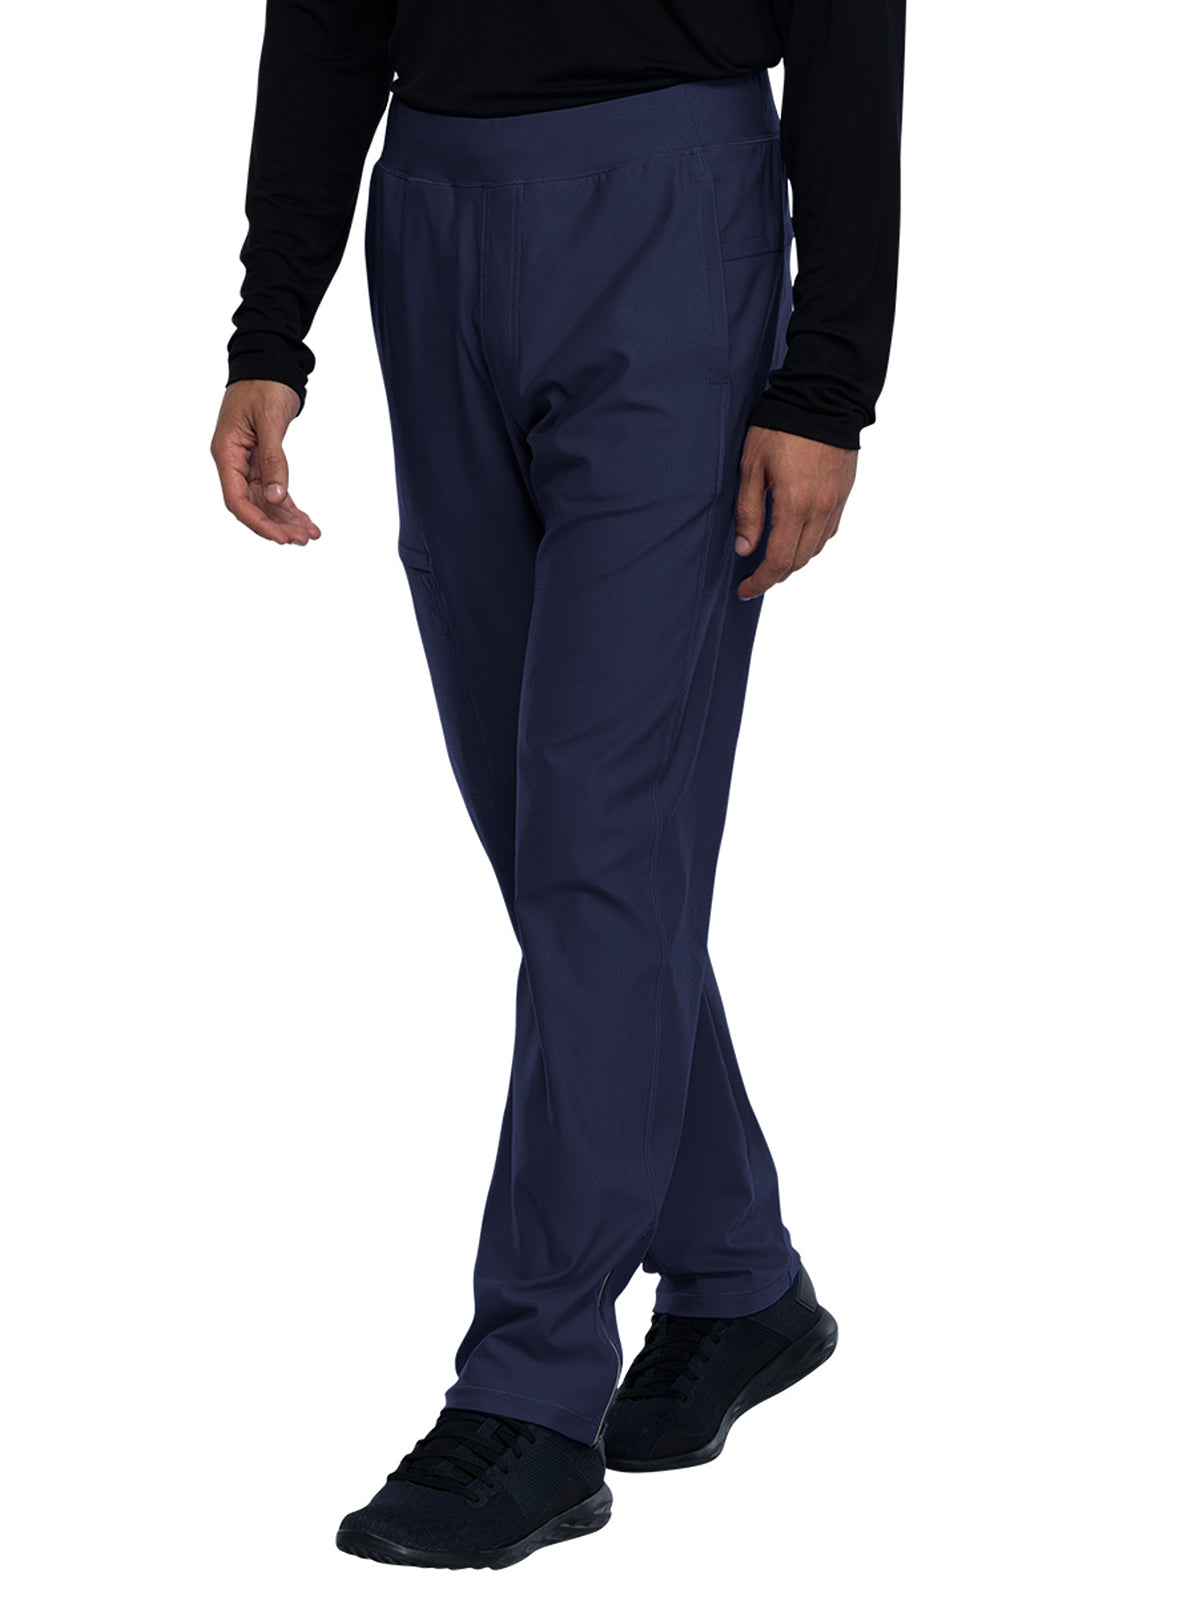 Men's Faux Front Fly Tapered Leg Pull-on Scrub Pant - CK185 - Navy